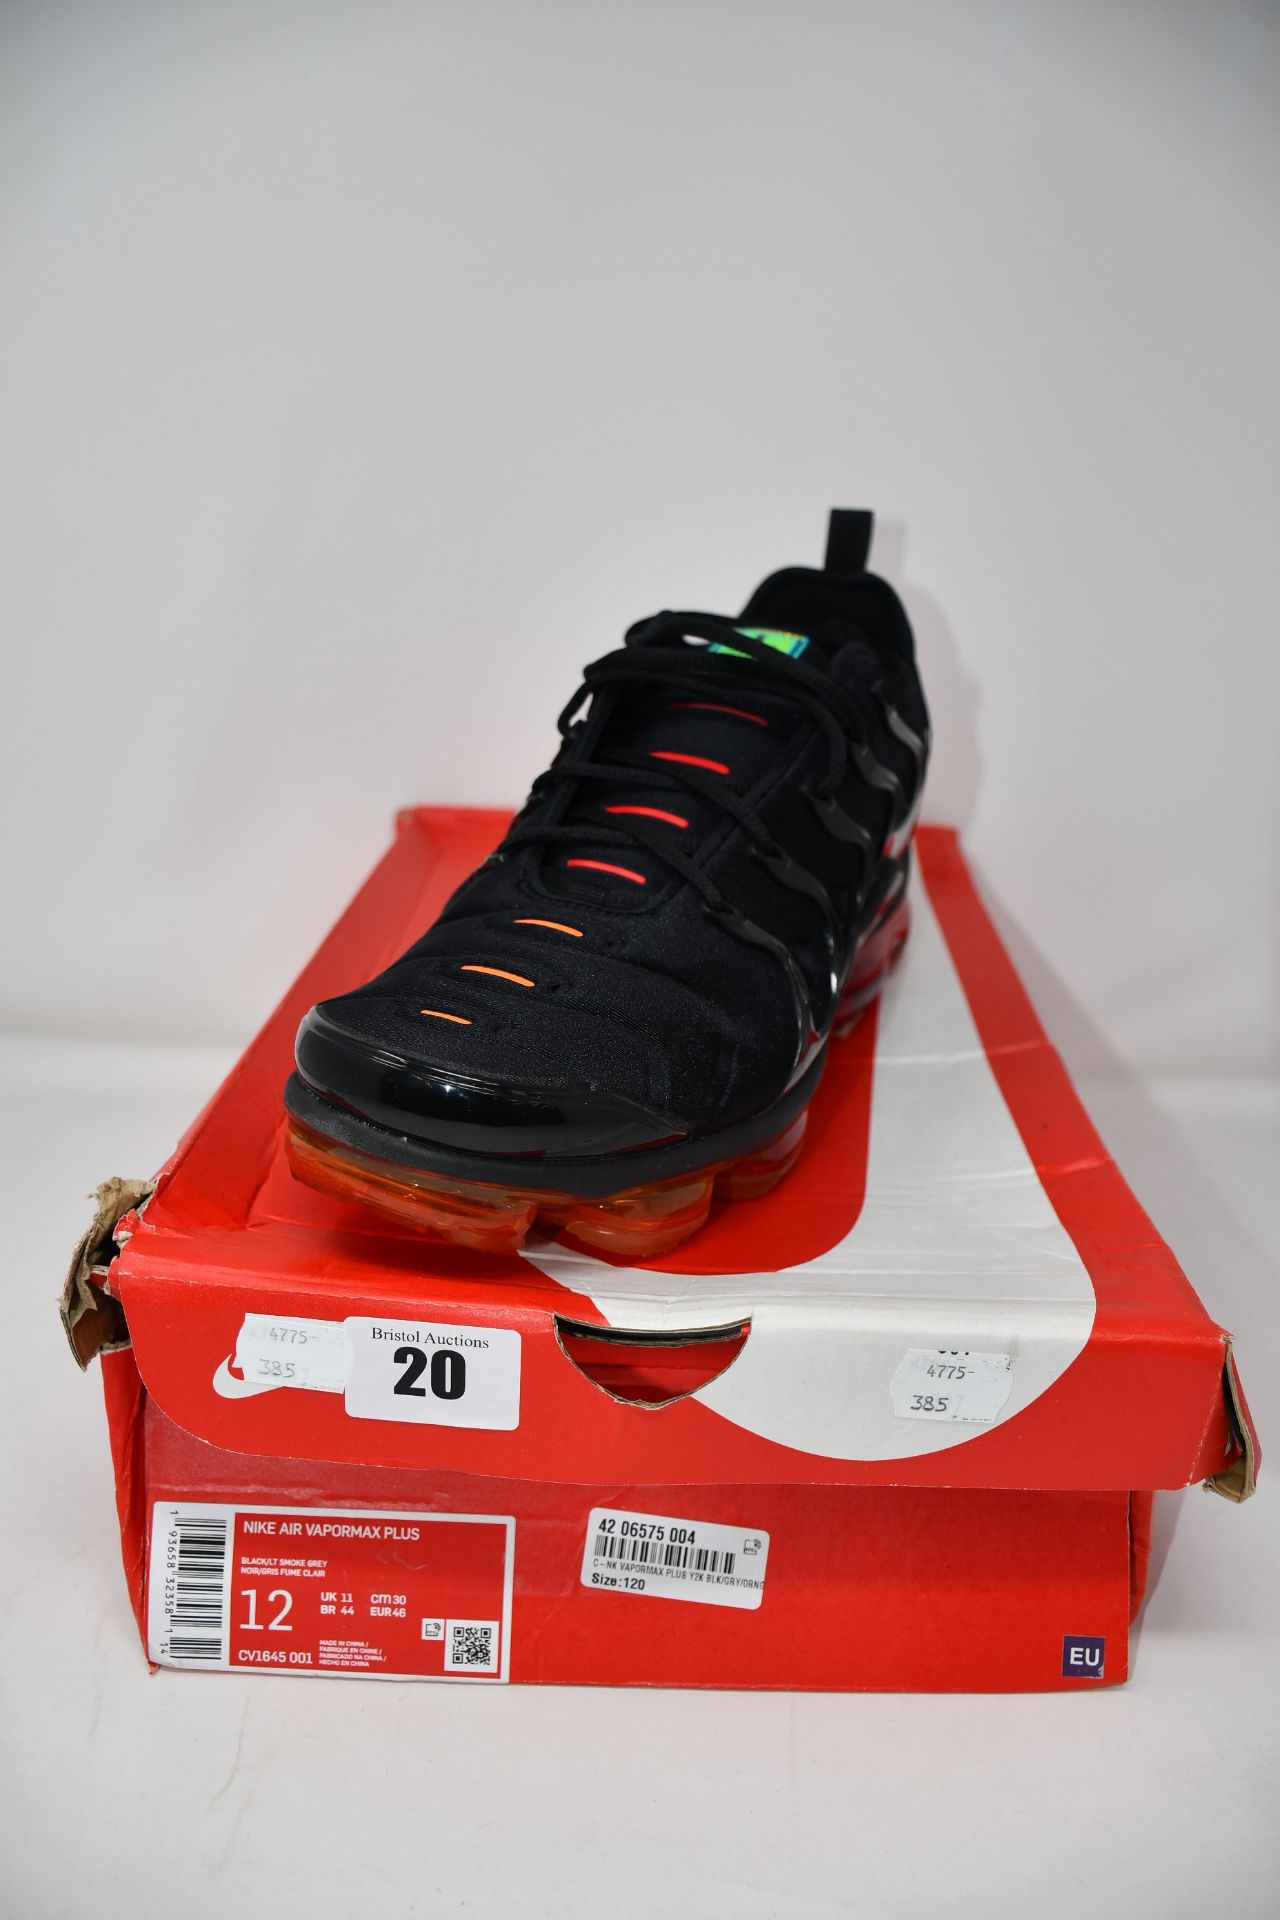 A pair of as new Nike Air Vapormax Plus trainers (UK 11).